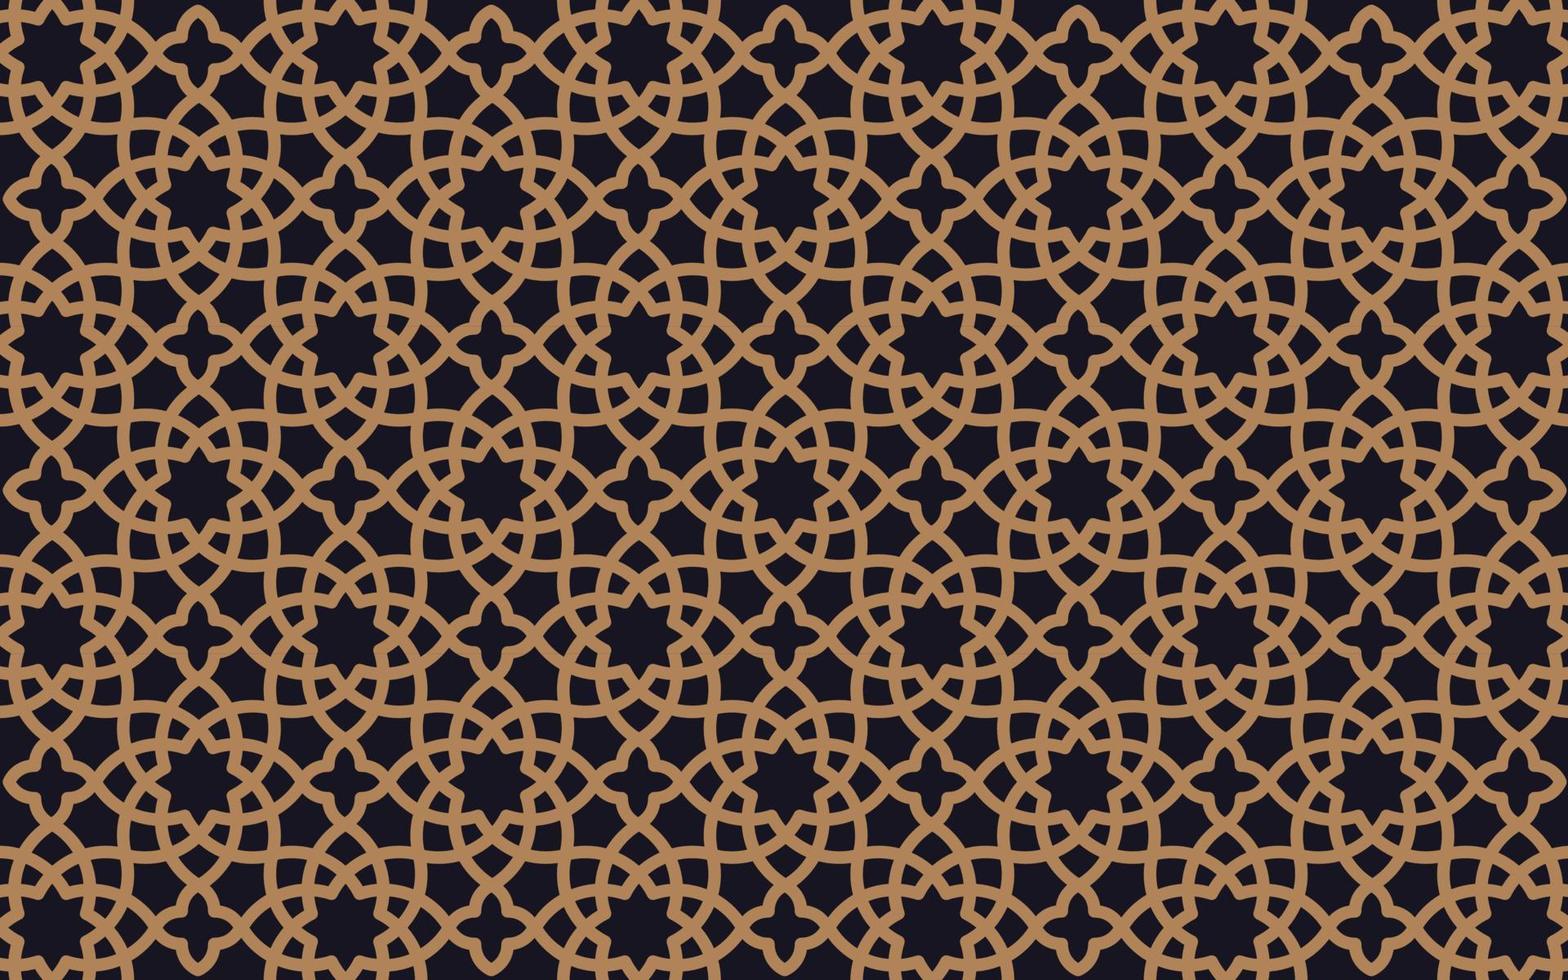 Arabic pattern background and Islamic ornament vector. vector